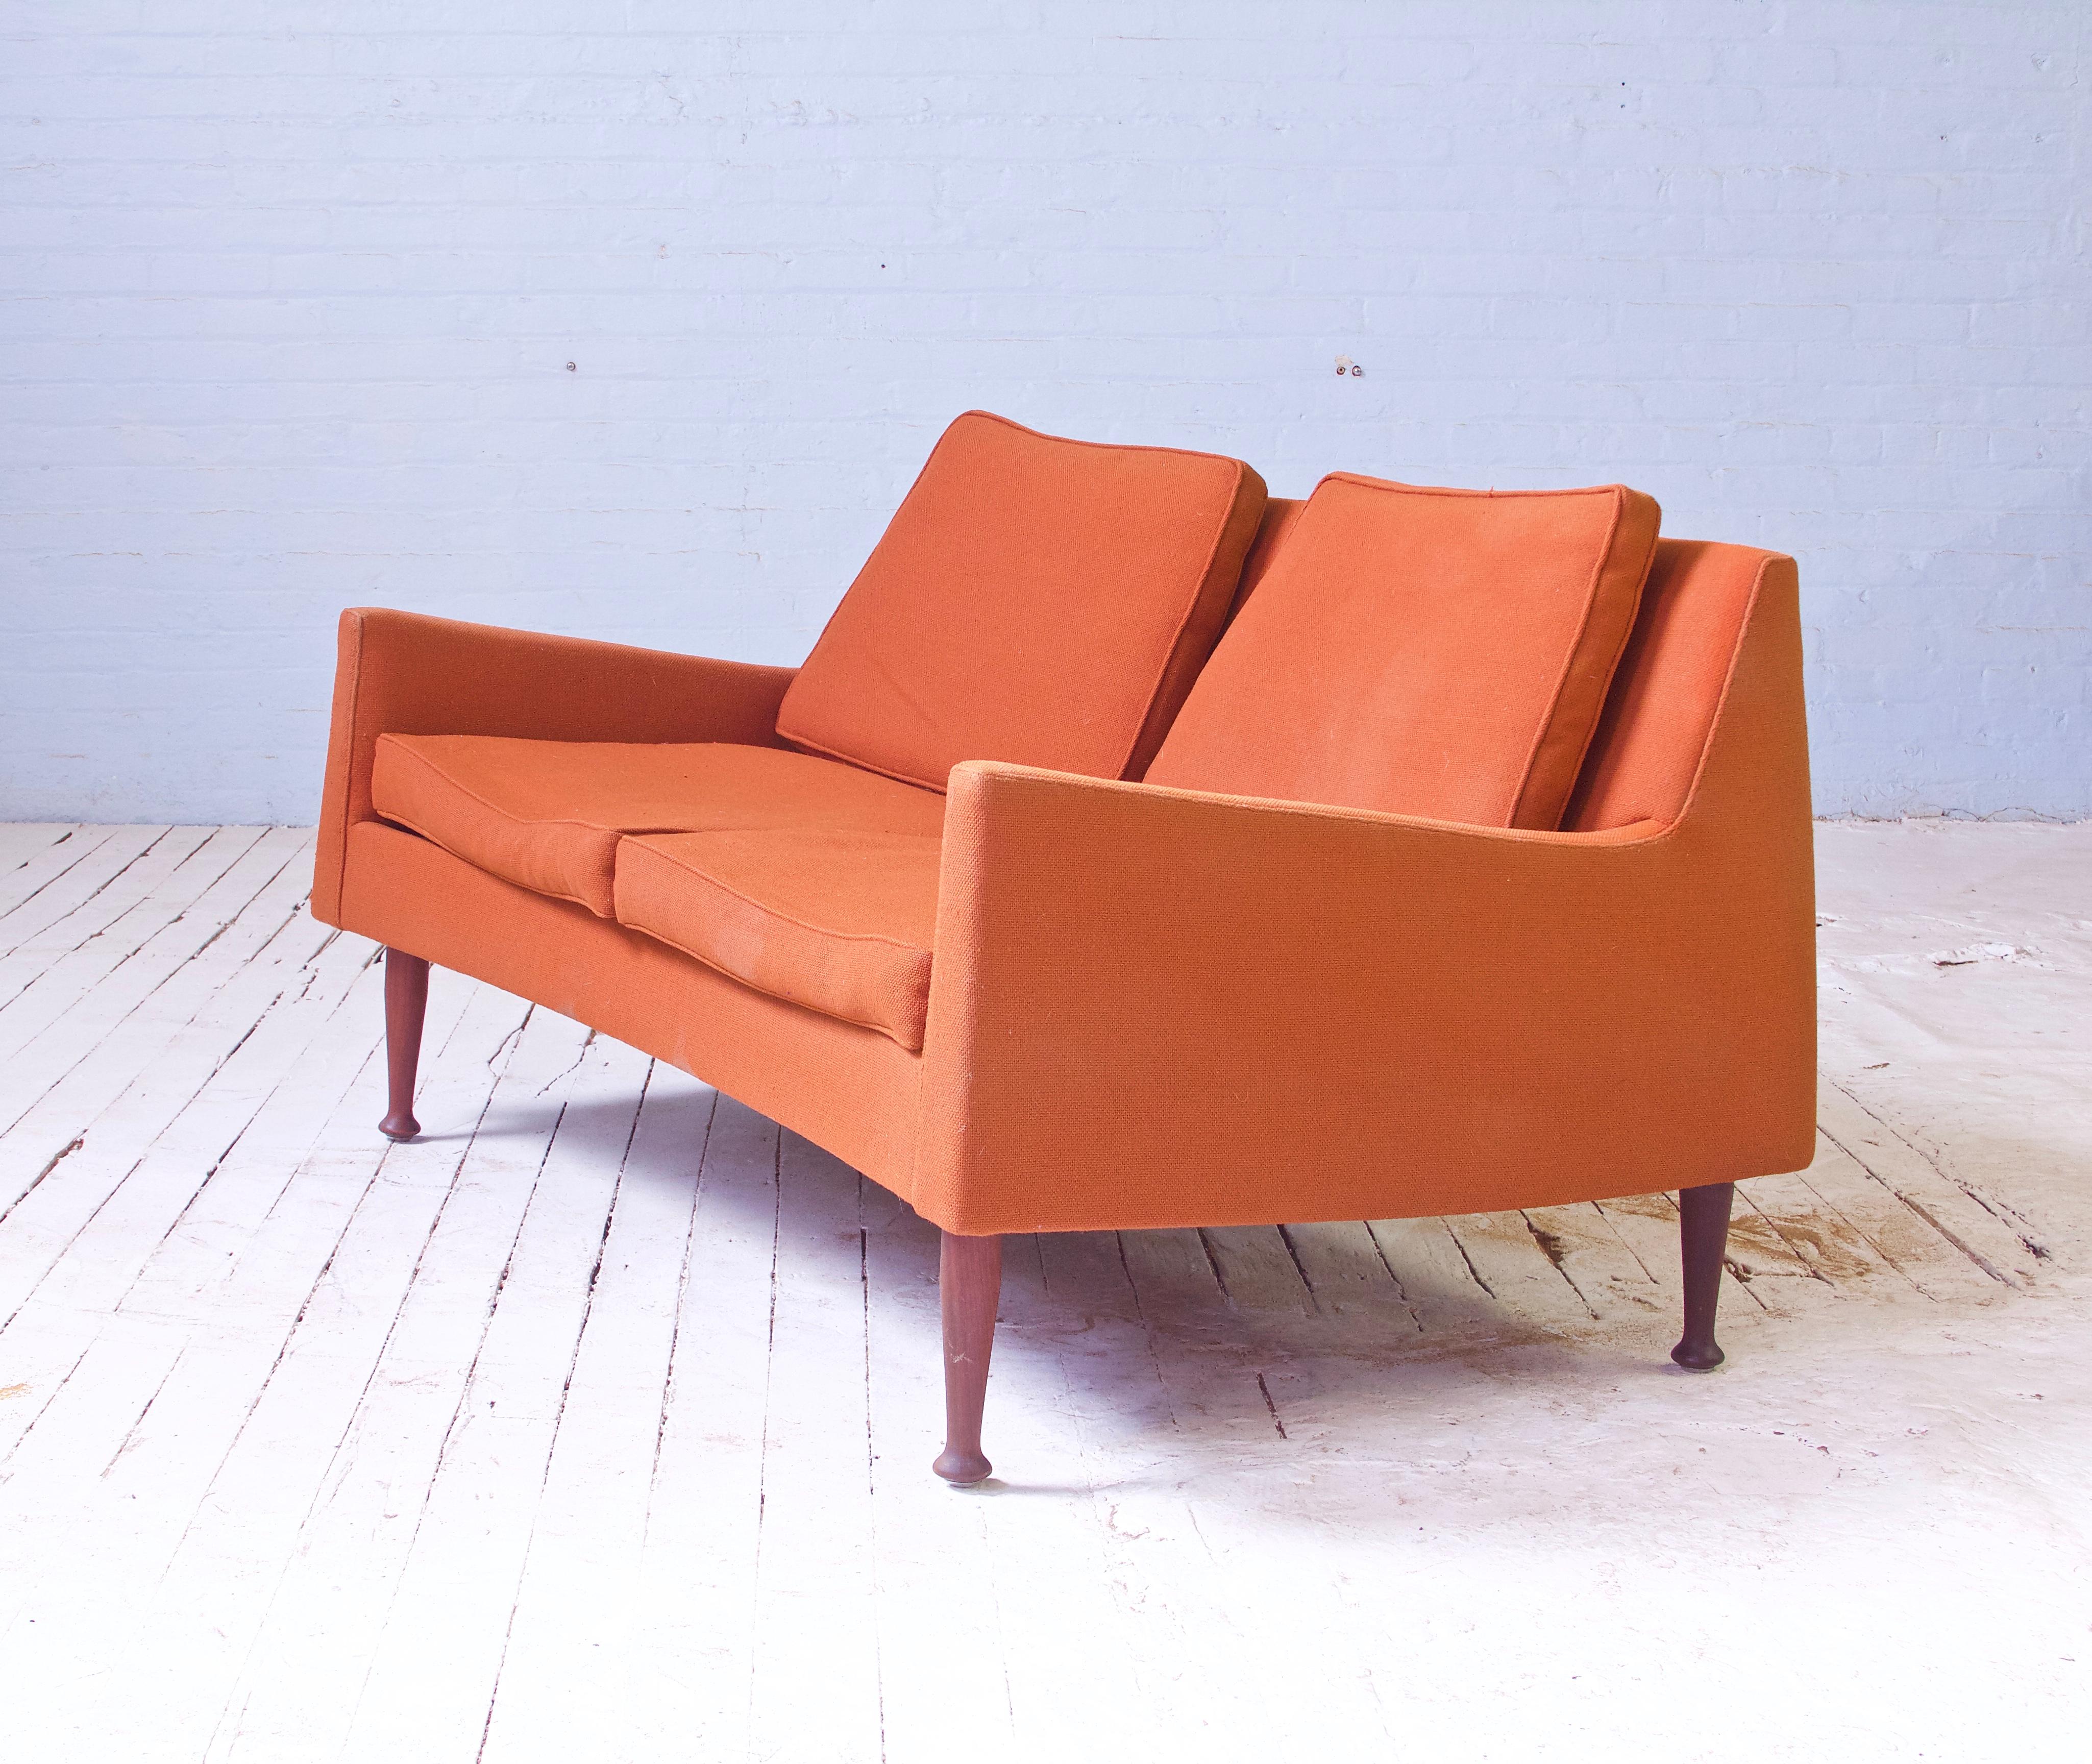 A rare and early two seater sofa or settee by Jens Risom for Risom Manufacturing Corp. in walnut & original nubby wool upholstery with hand-stitching. Completely original vintage condition, manufacturer's tag and designer's cloth tag both remain